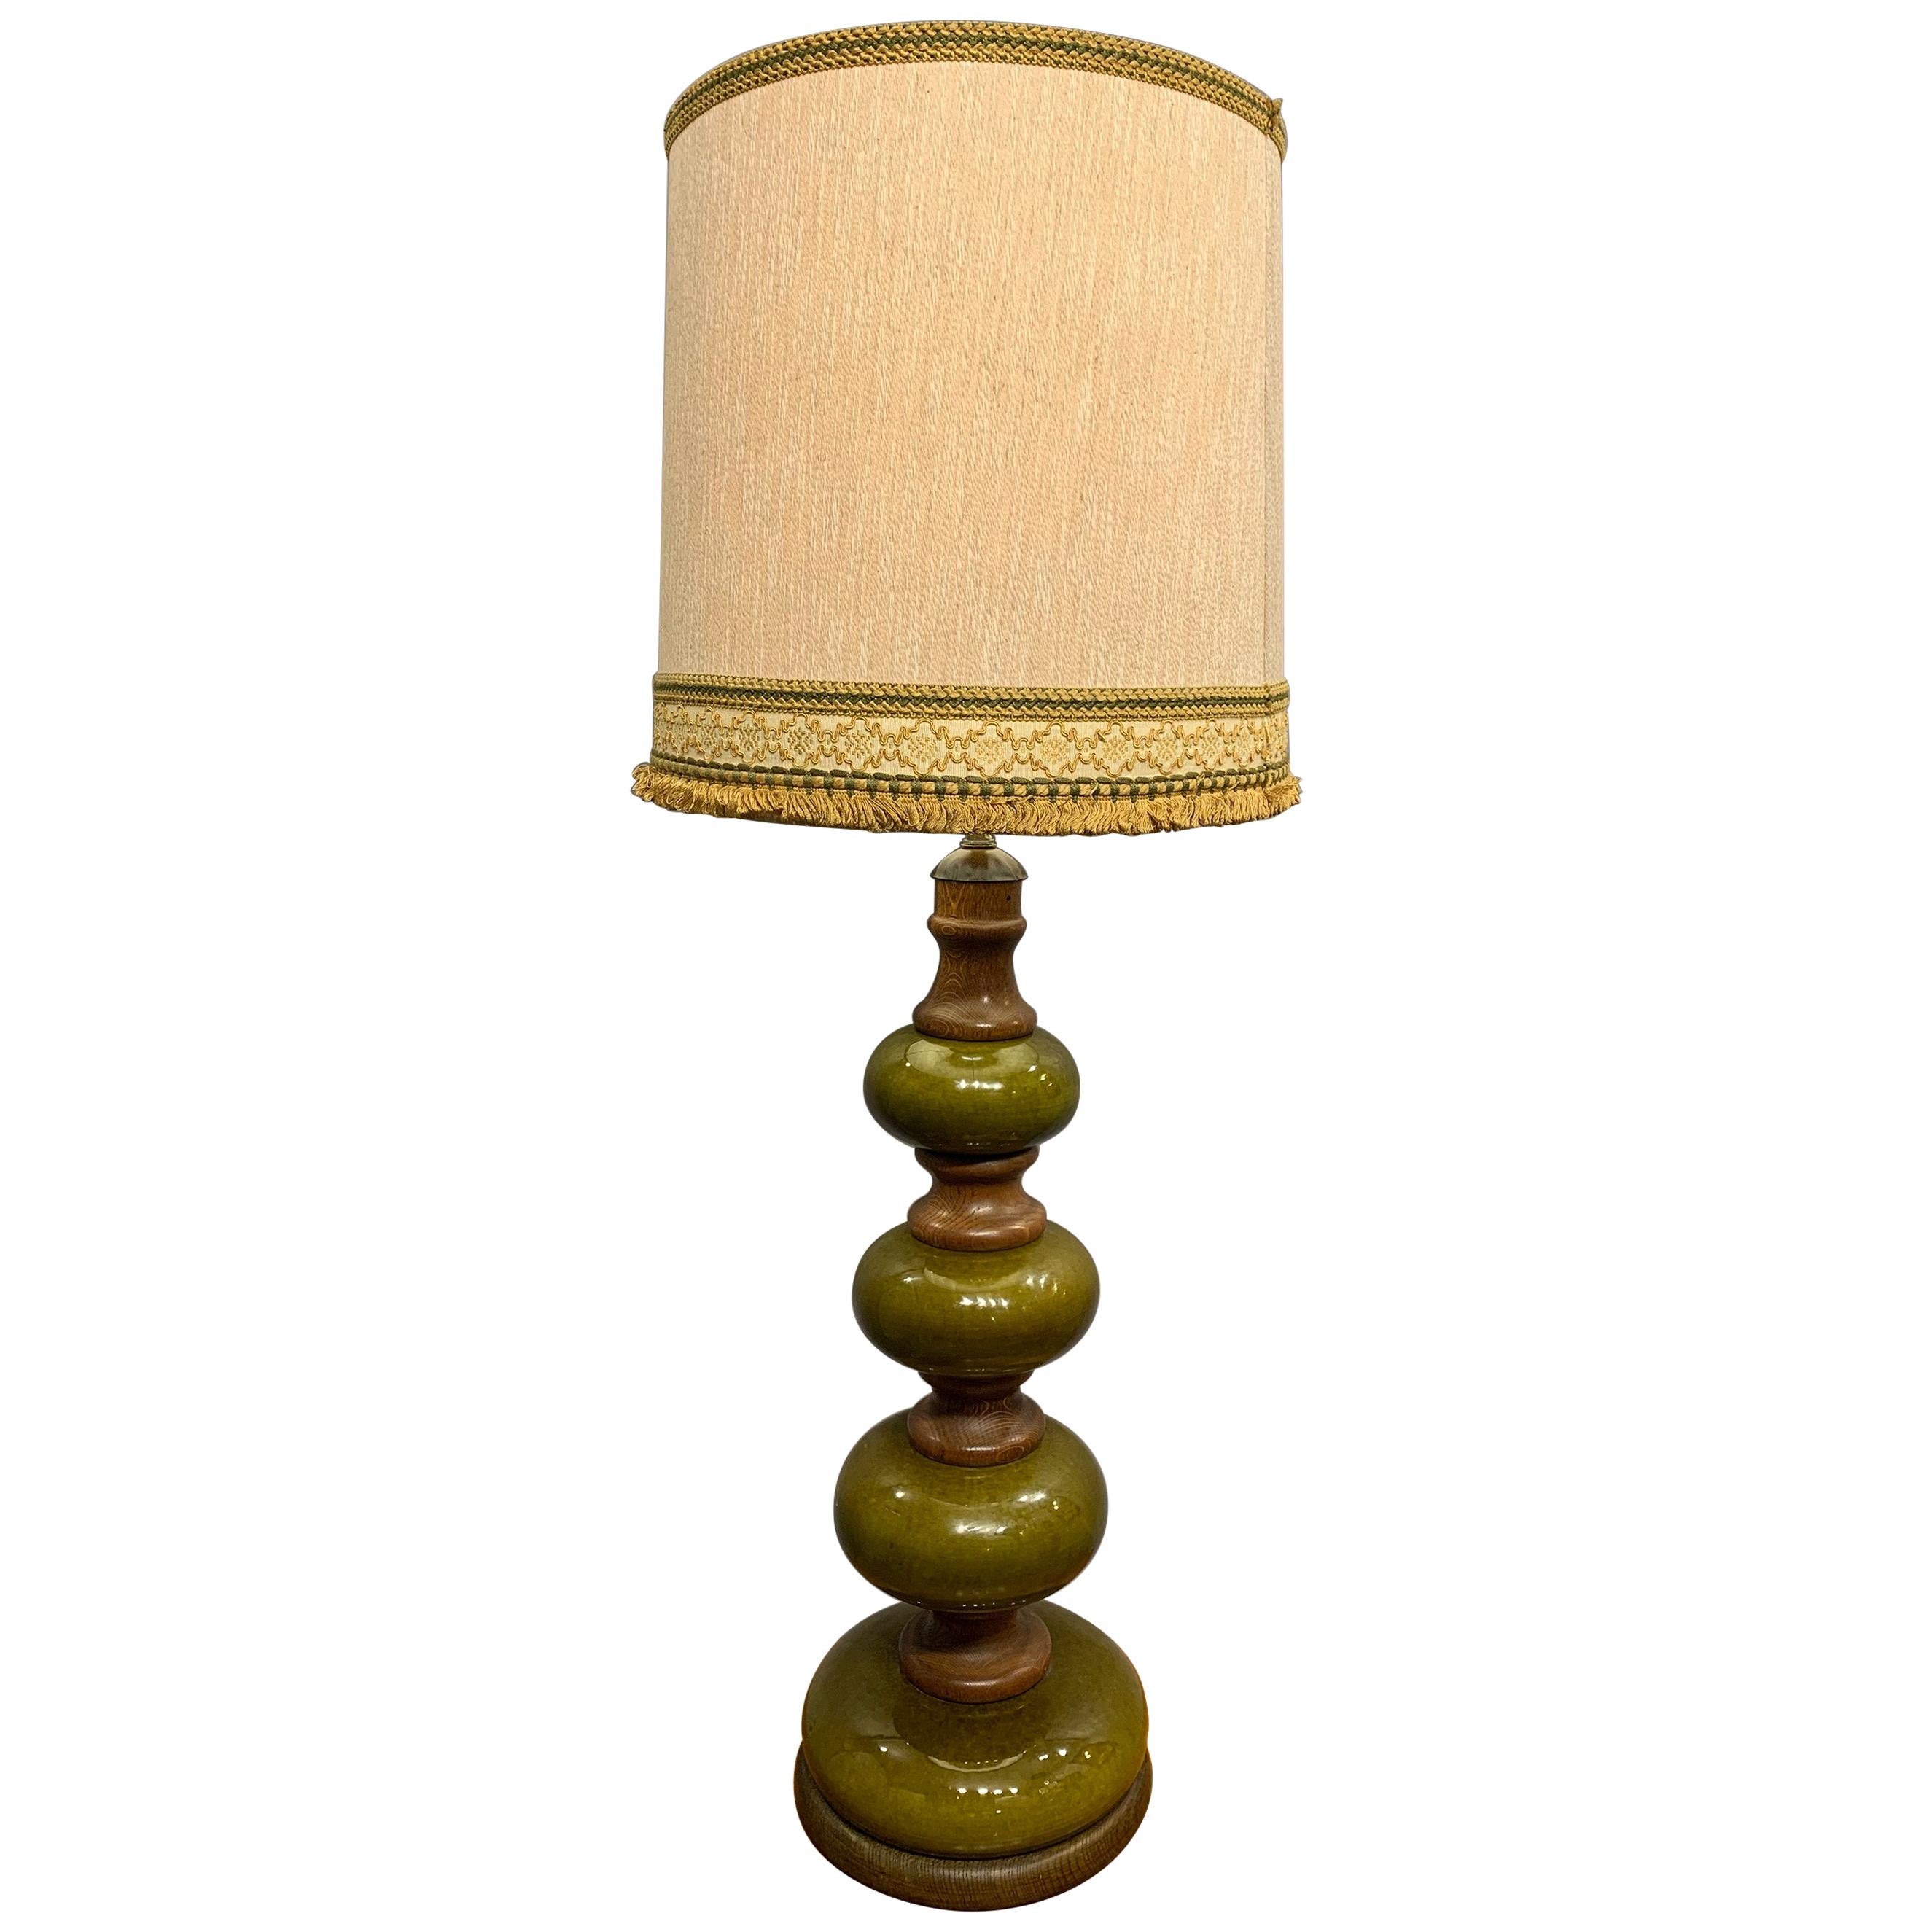 Tall German Vintage Green Glazed Ceramic and Wooden Lamp Base Include Shade